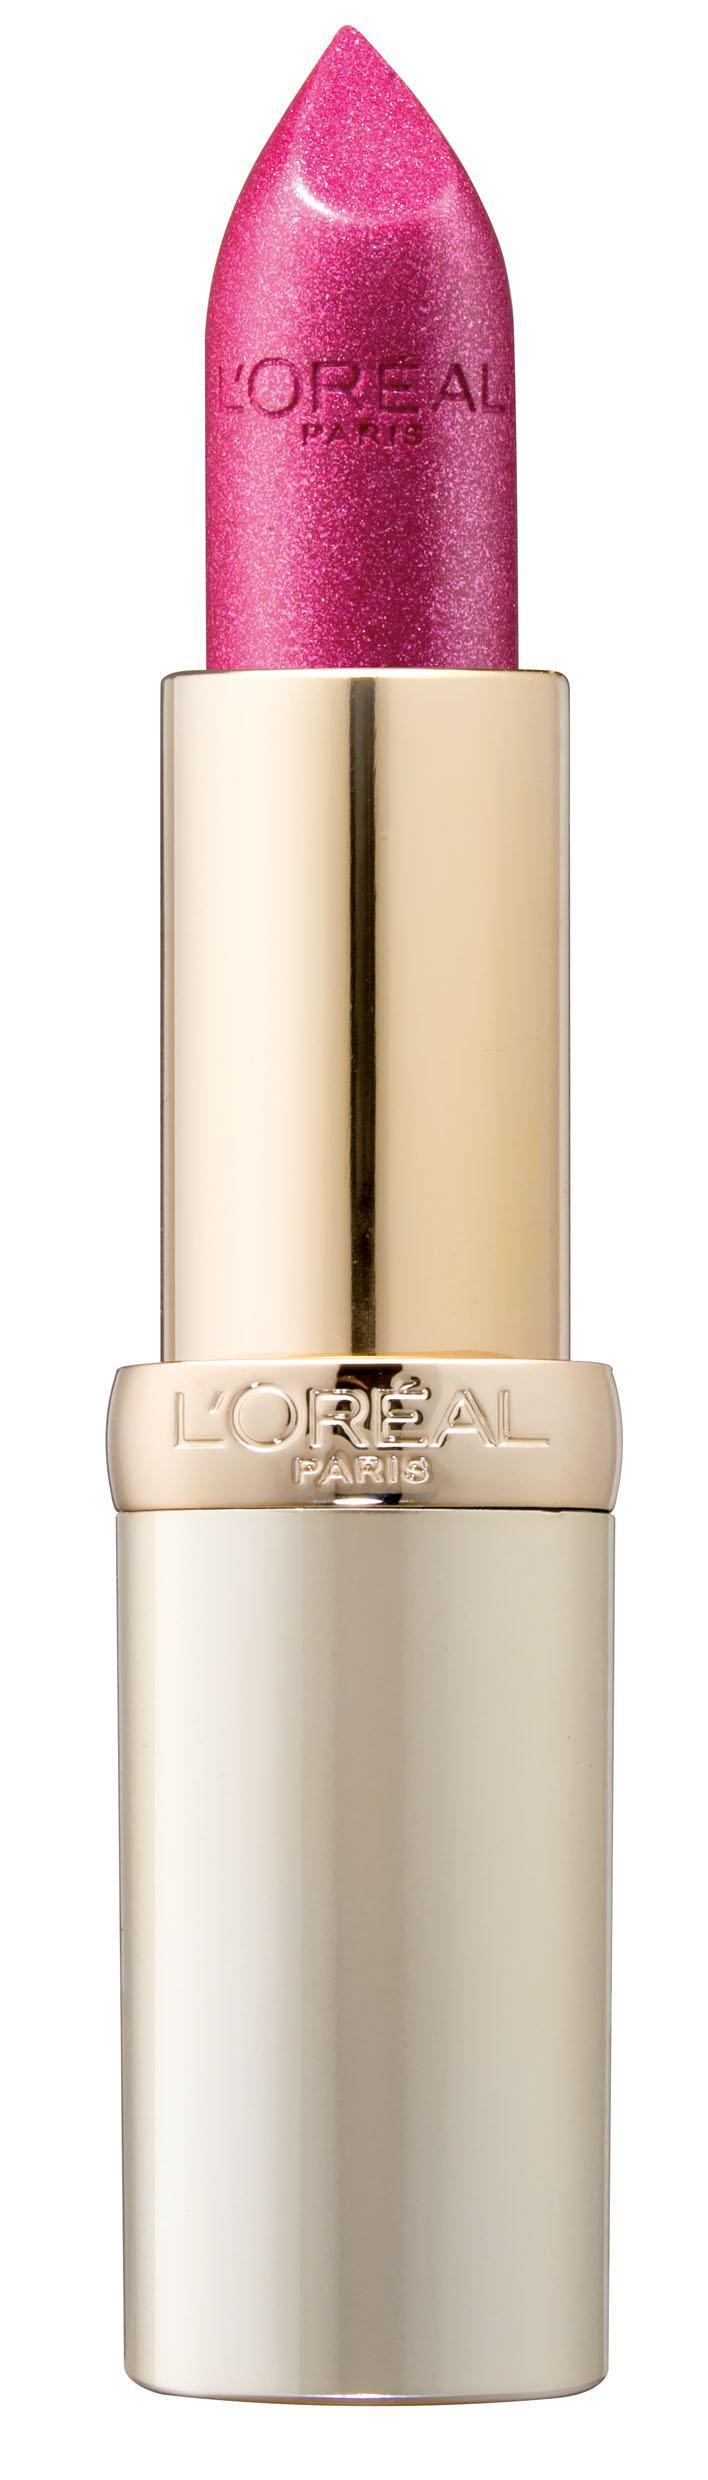 Image of L'OREAL Color Riche Accord Intense 287 Sparkling Amethy - 5ml